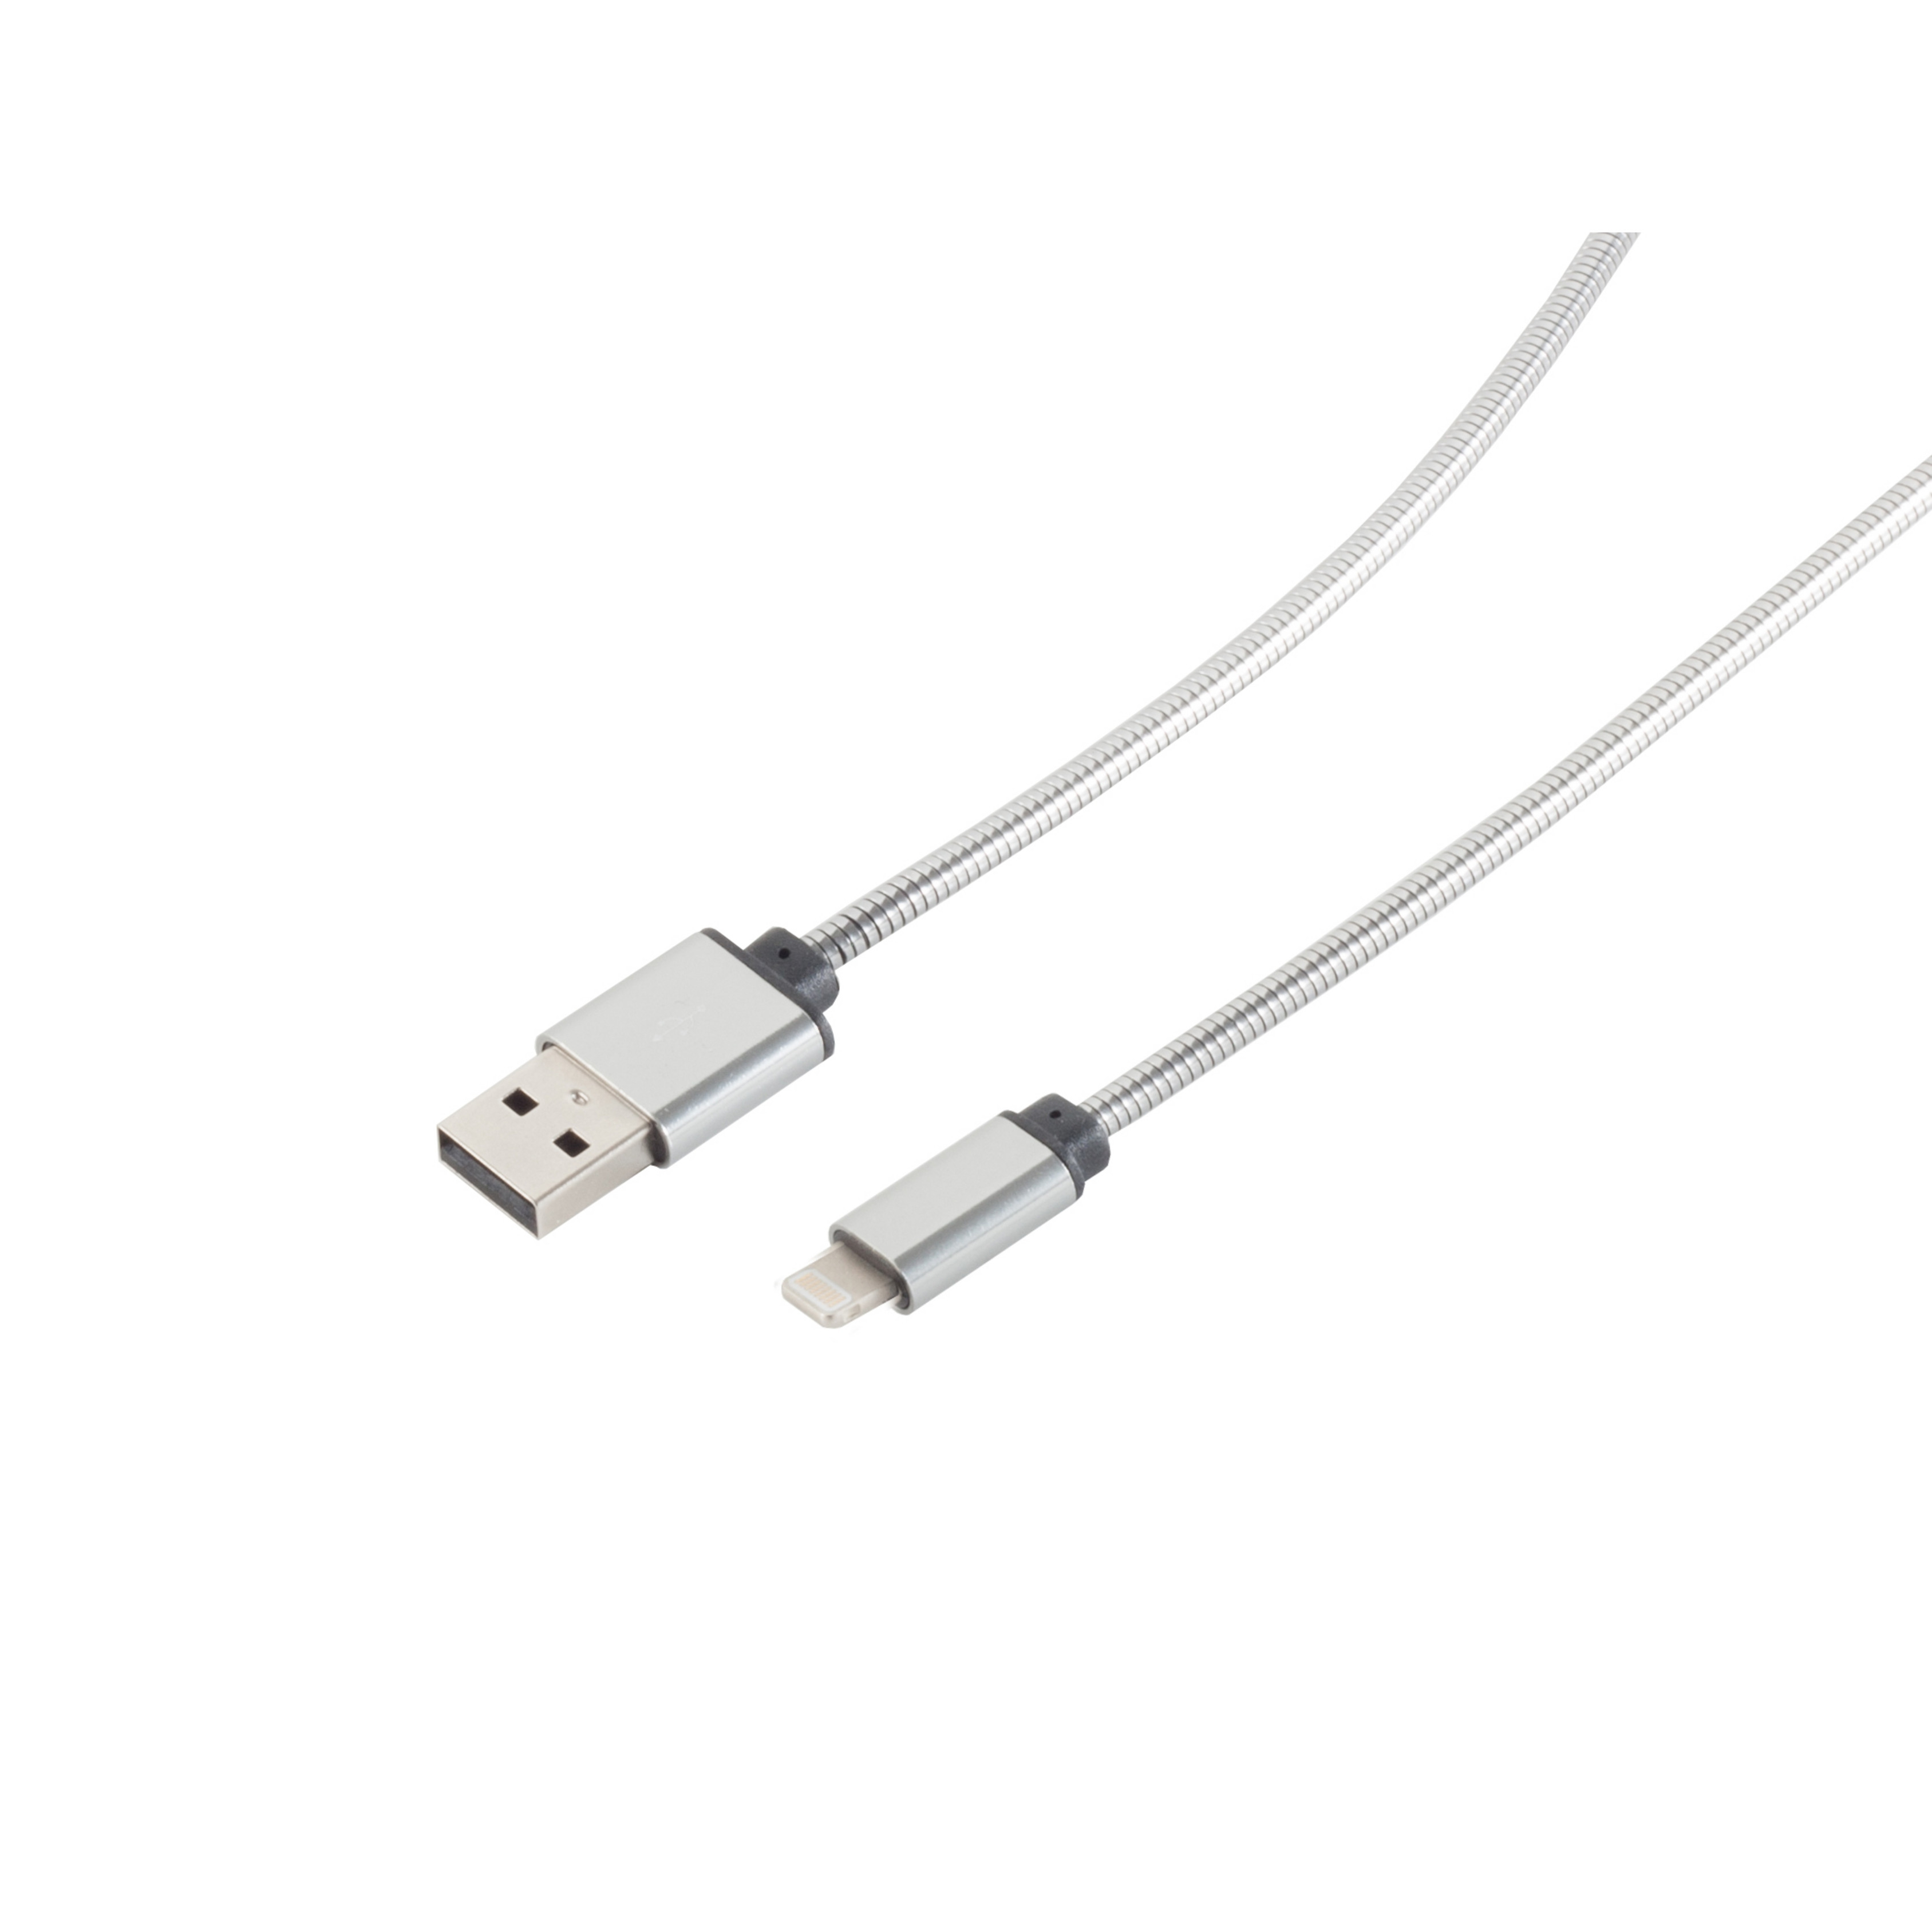 S/CONN MAXIMUM CONNECTIVITY USB A/ Silber USB USB 8-pin 1m Lade-Sync Kabel Kabel Steel